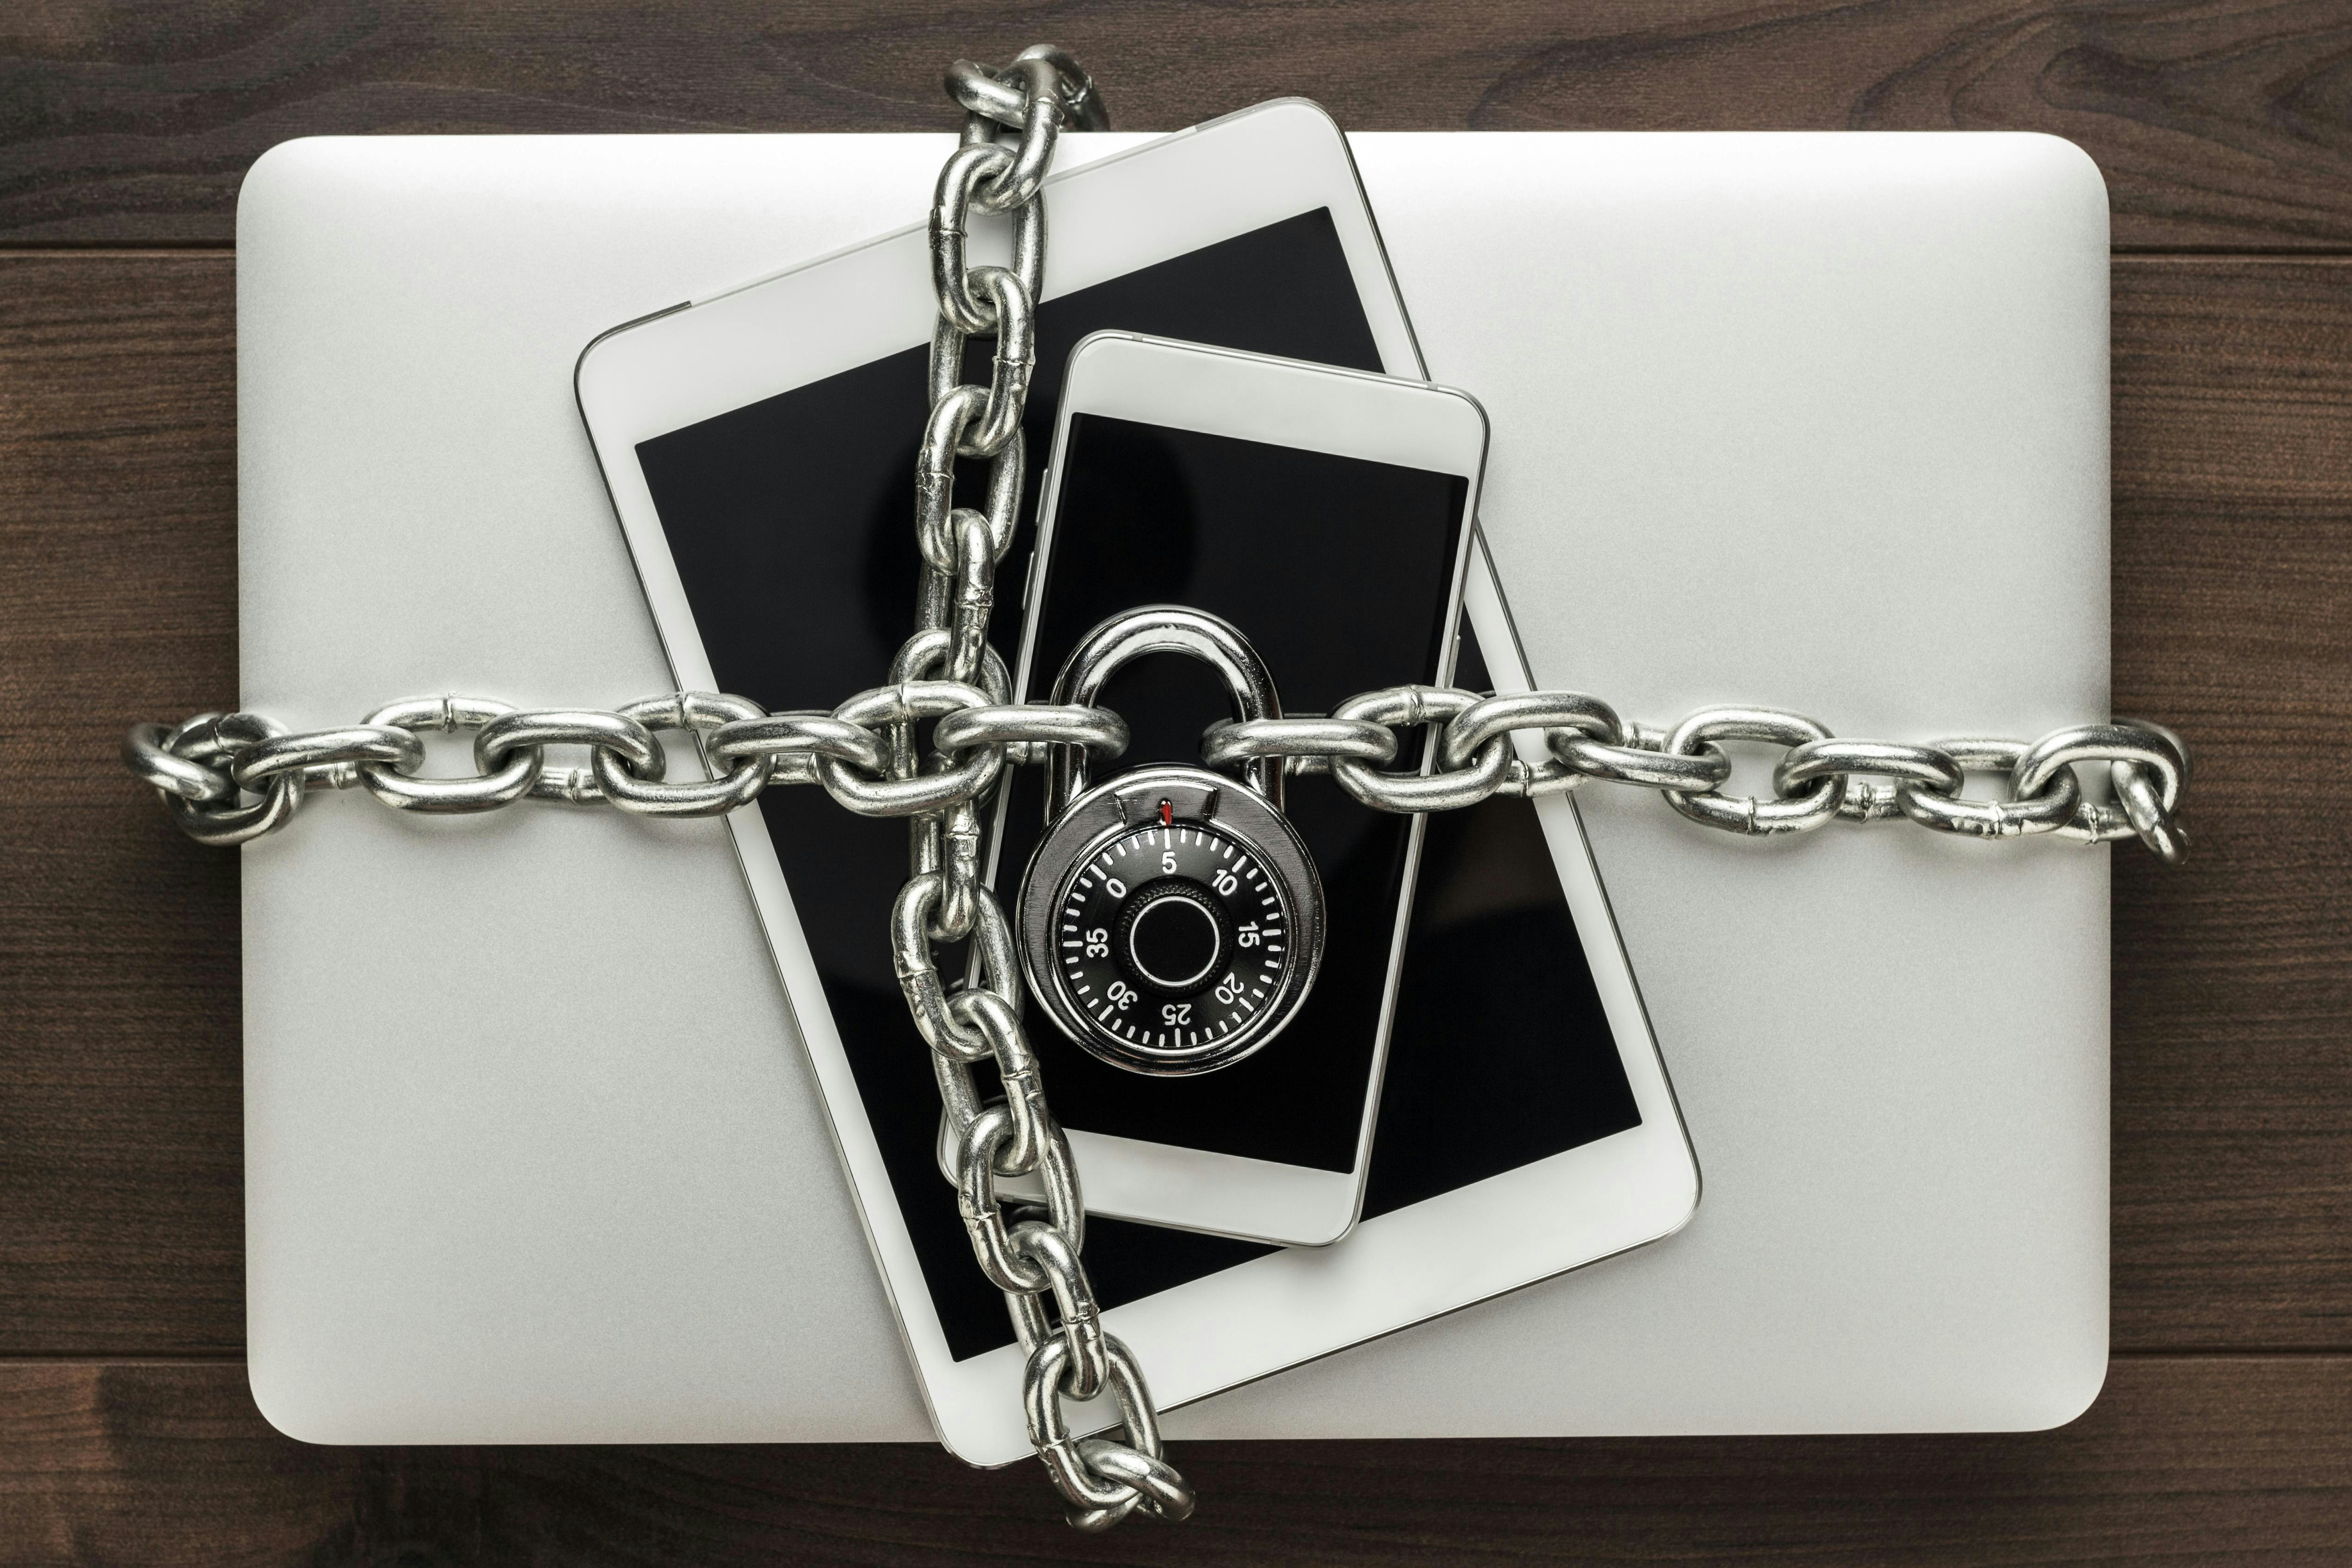 Laptop, tablet and mobile phone chained and locked with a combination lock